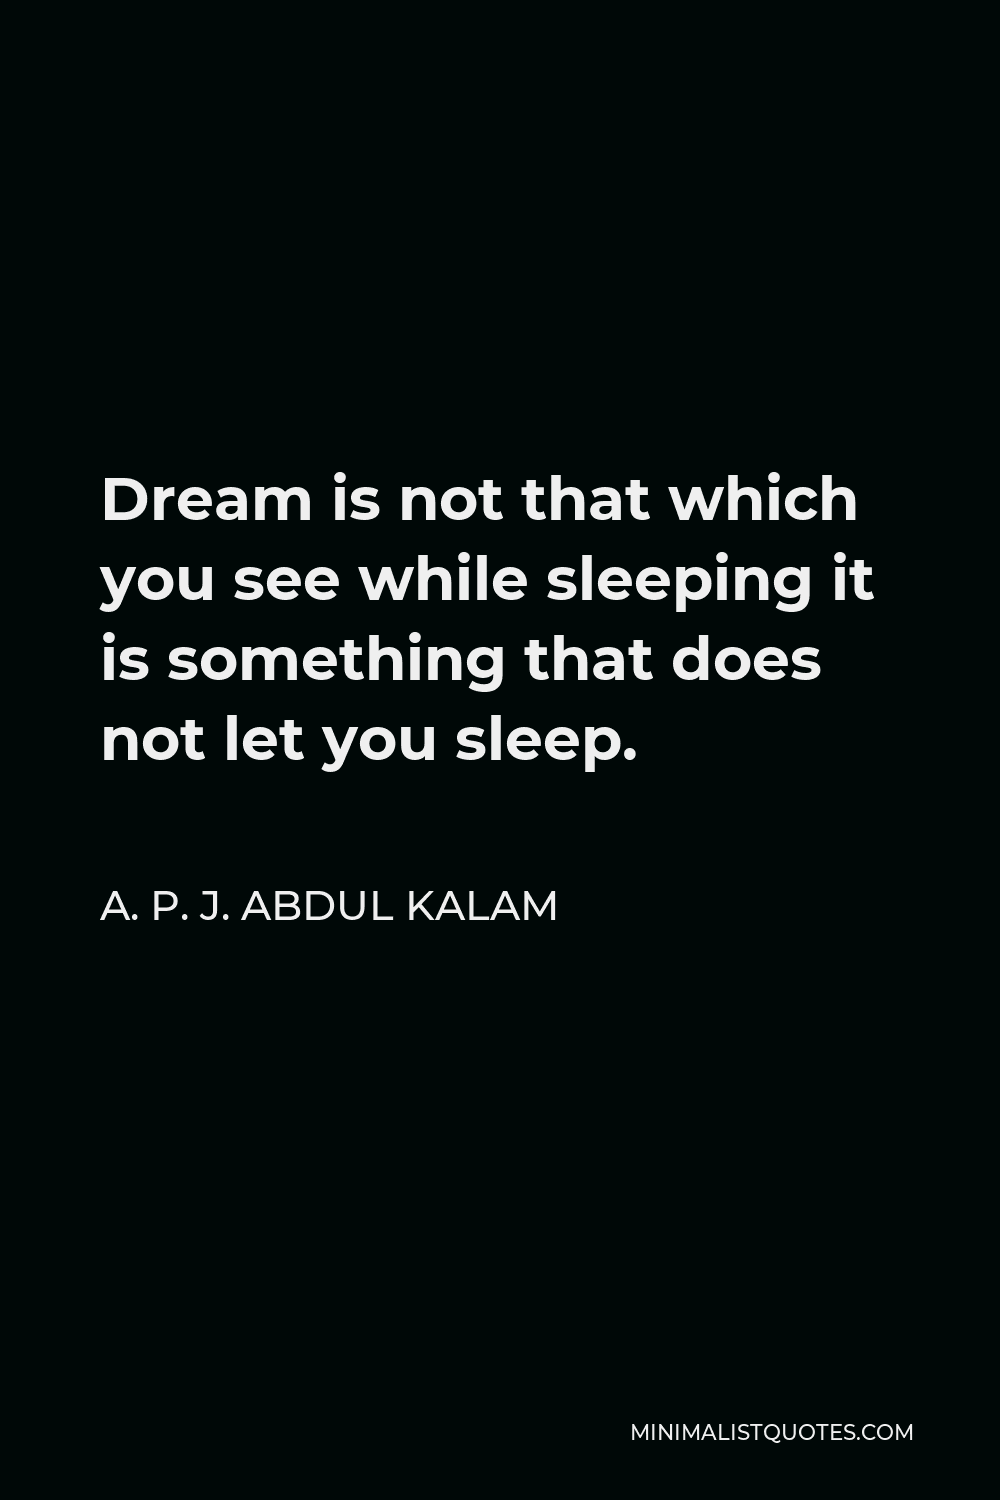 if you dream are you in deep sleep